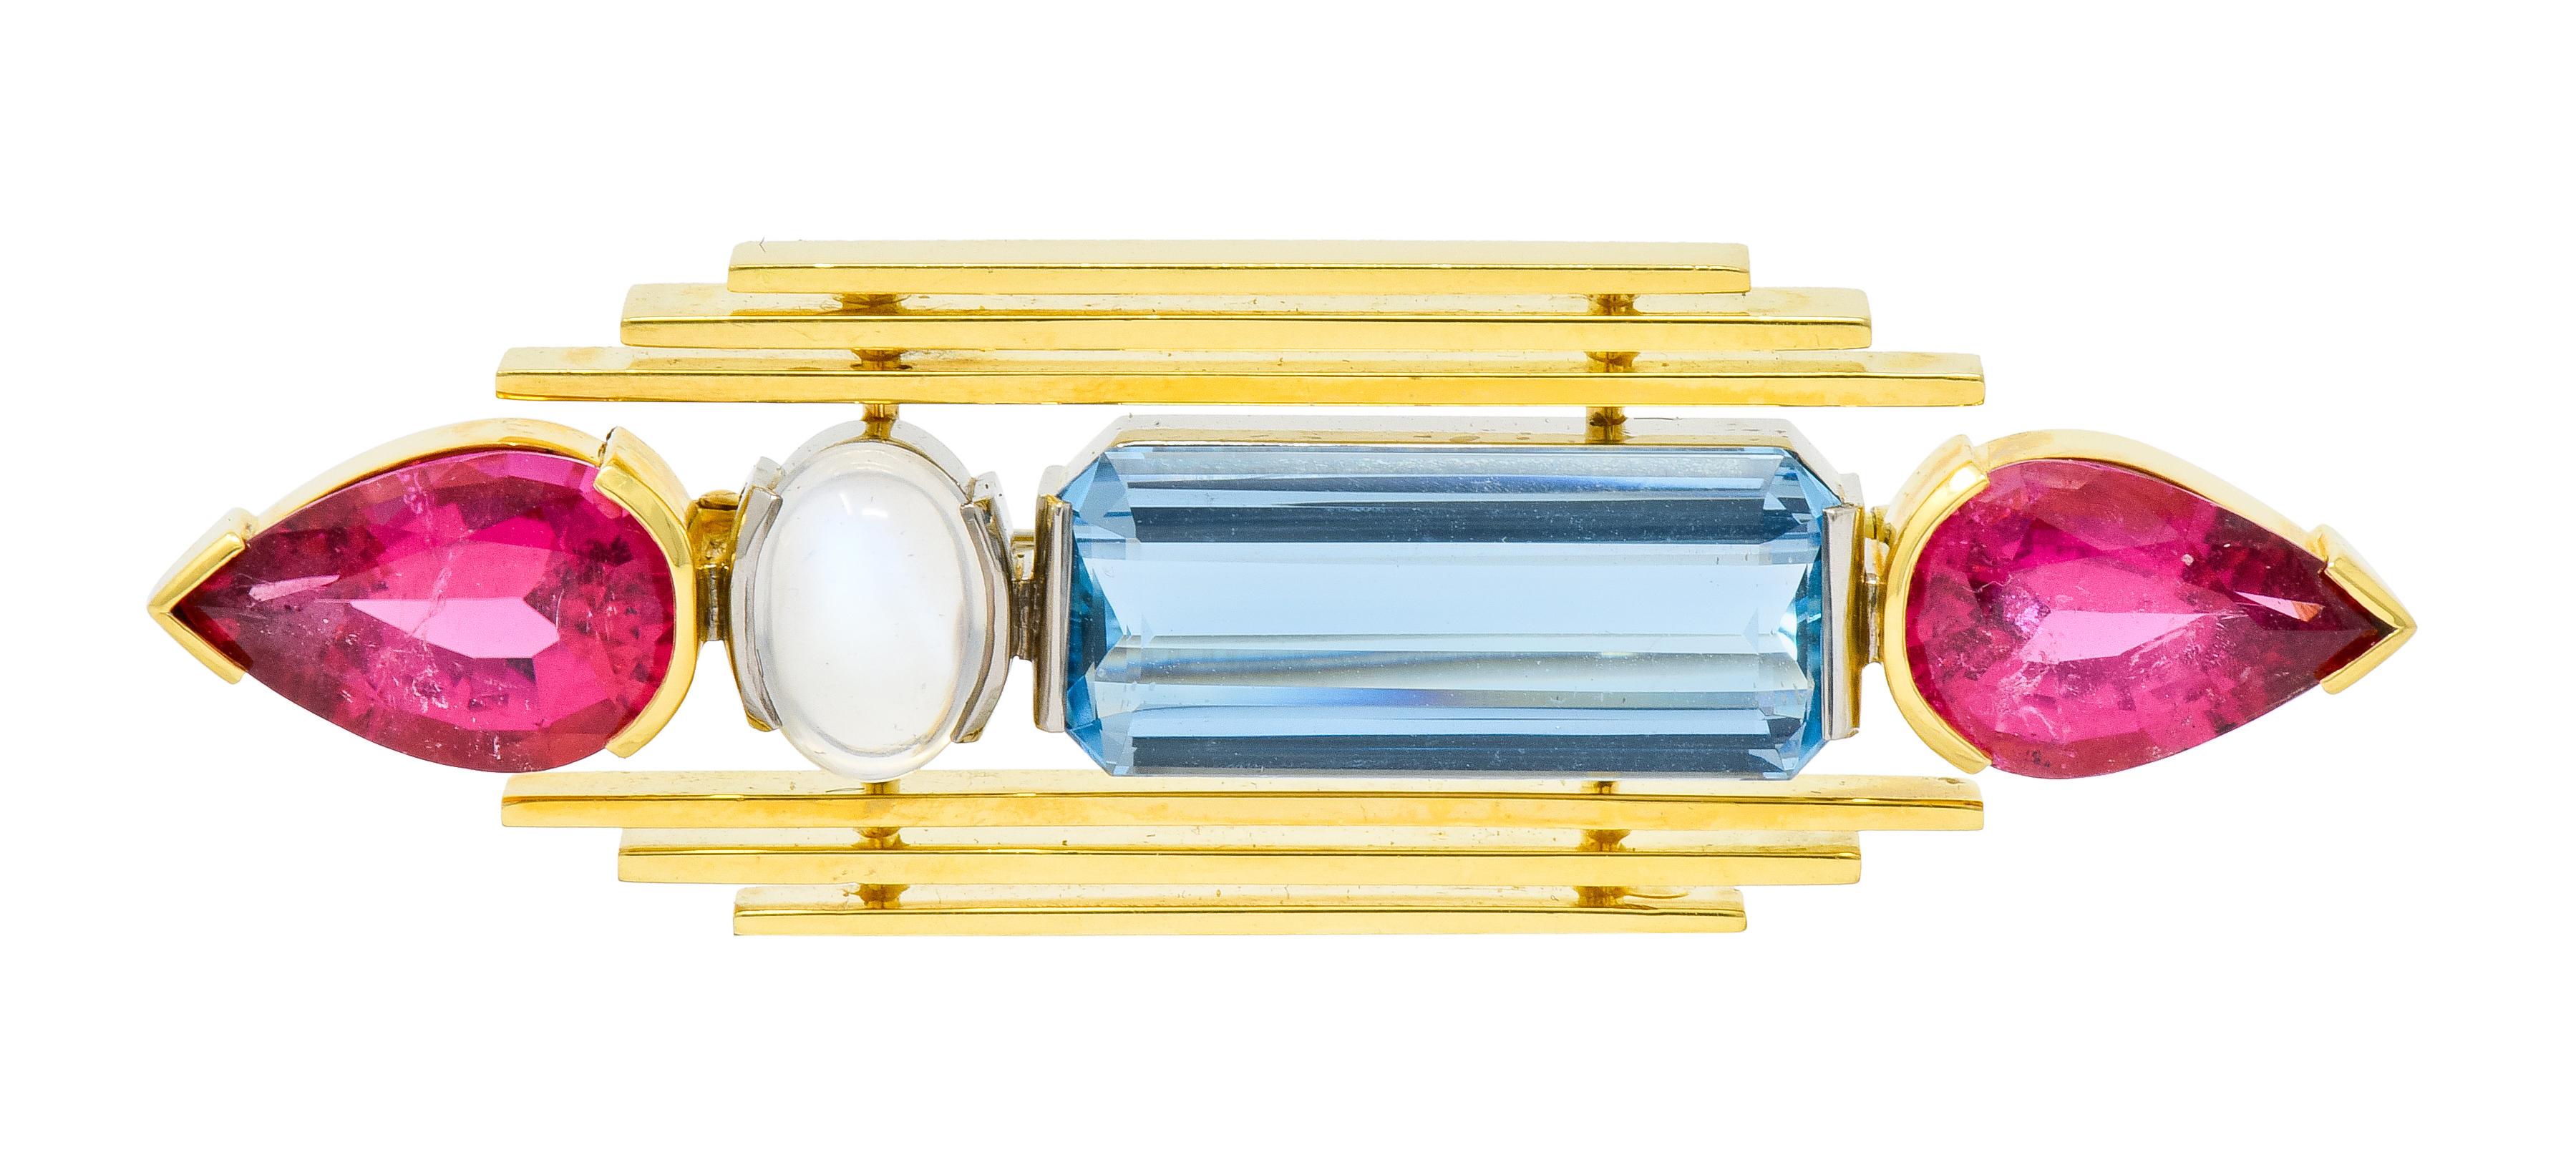 Bar style brooch centering a row of playfully colored and shaped gemstones, flanked by polished gold striations

Terminating as two pear shaped tourmaline measuring approximately 11.0 x 7.5 mm, very well-matched and extraordinarily pink in